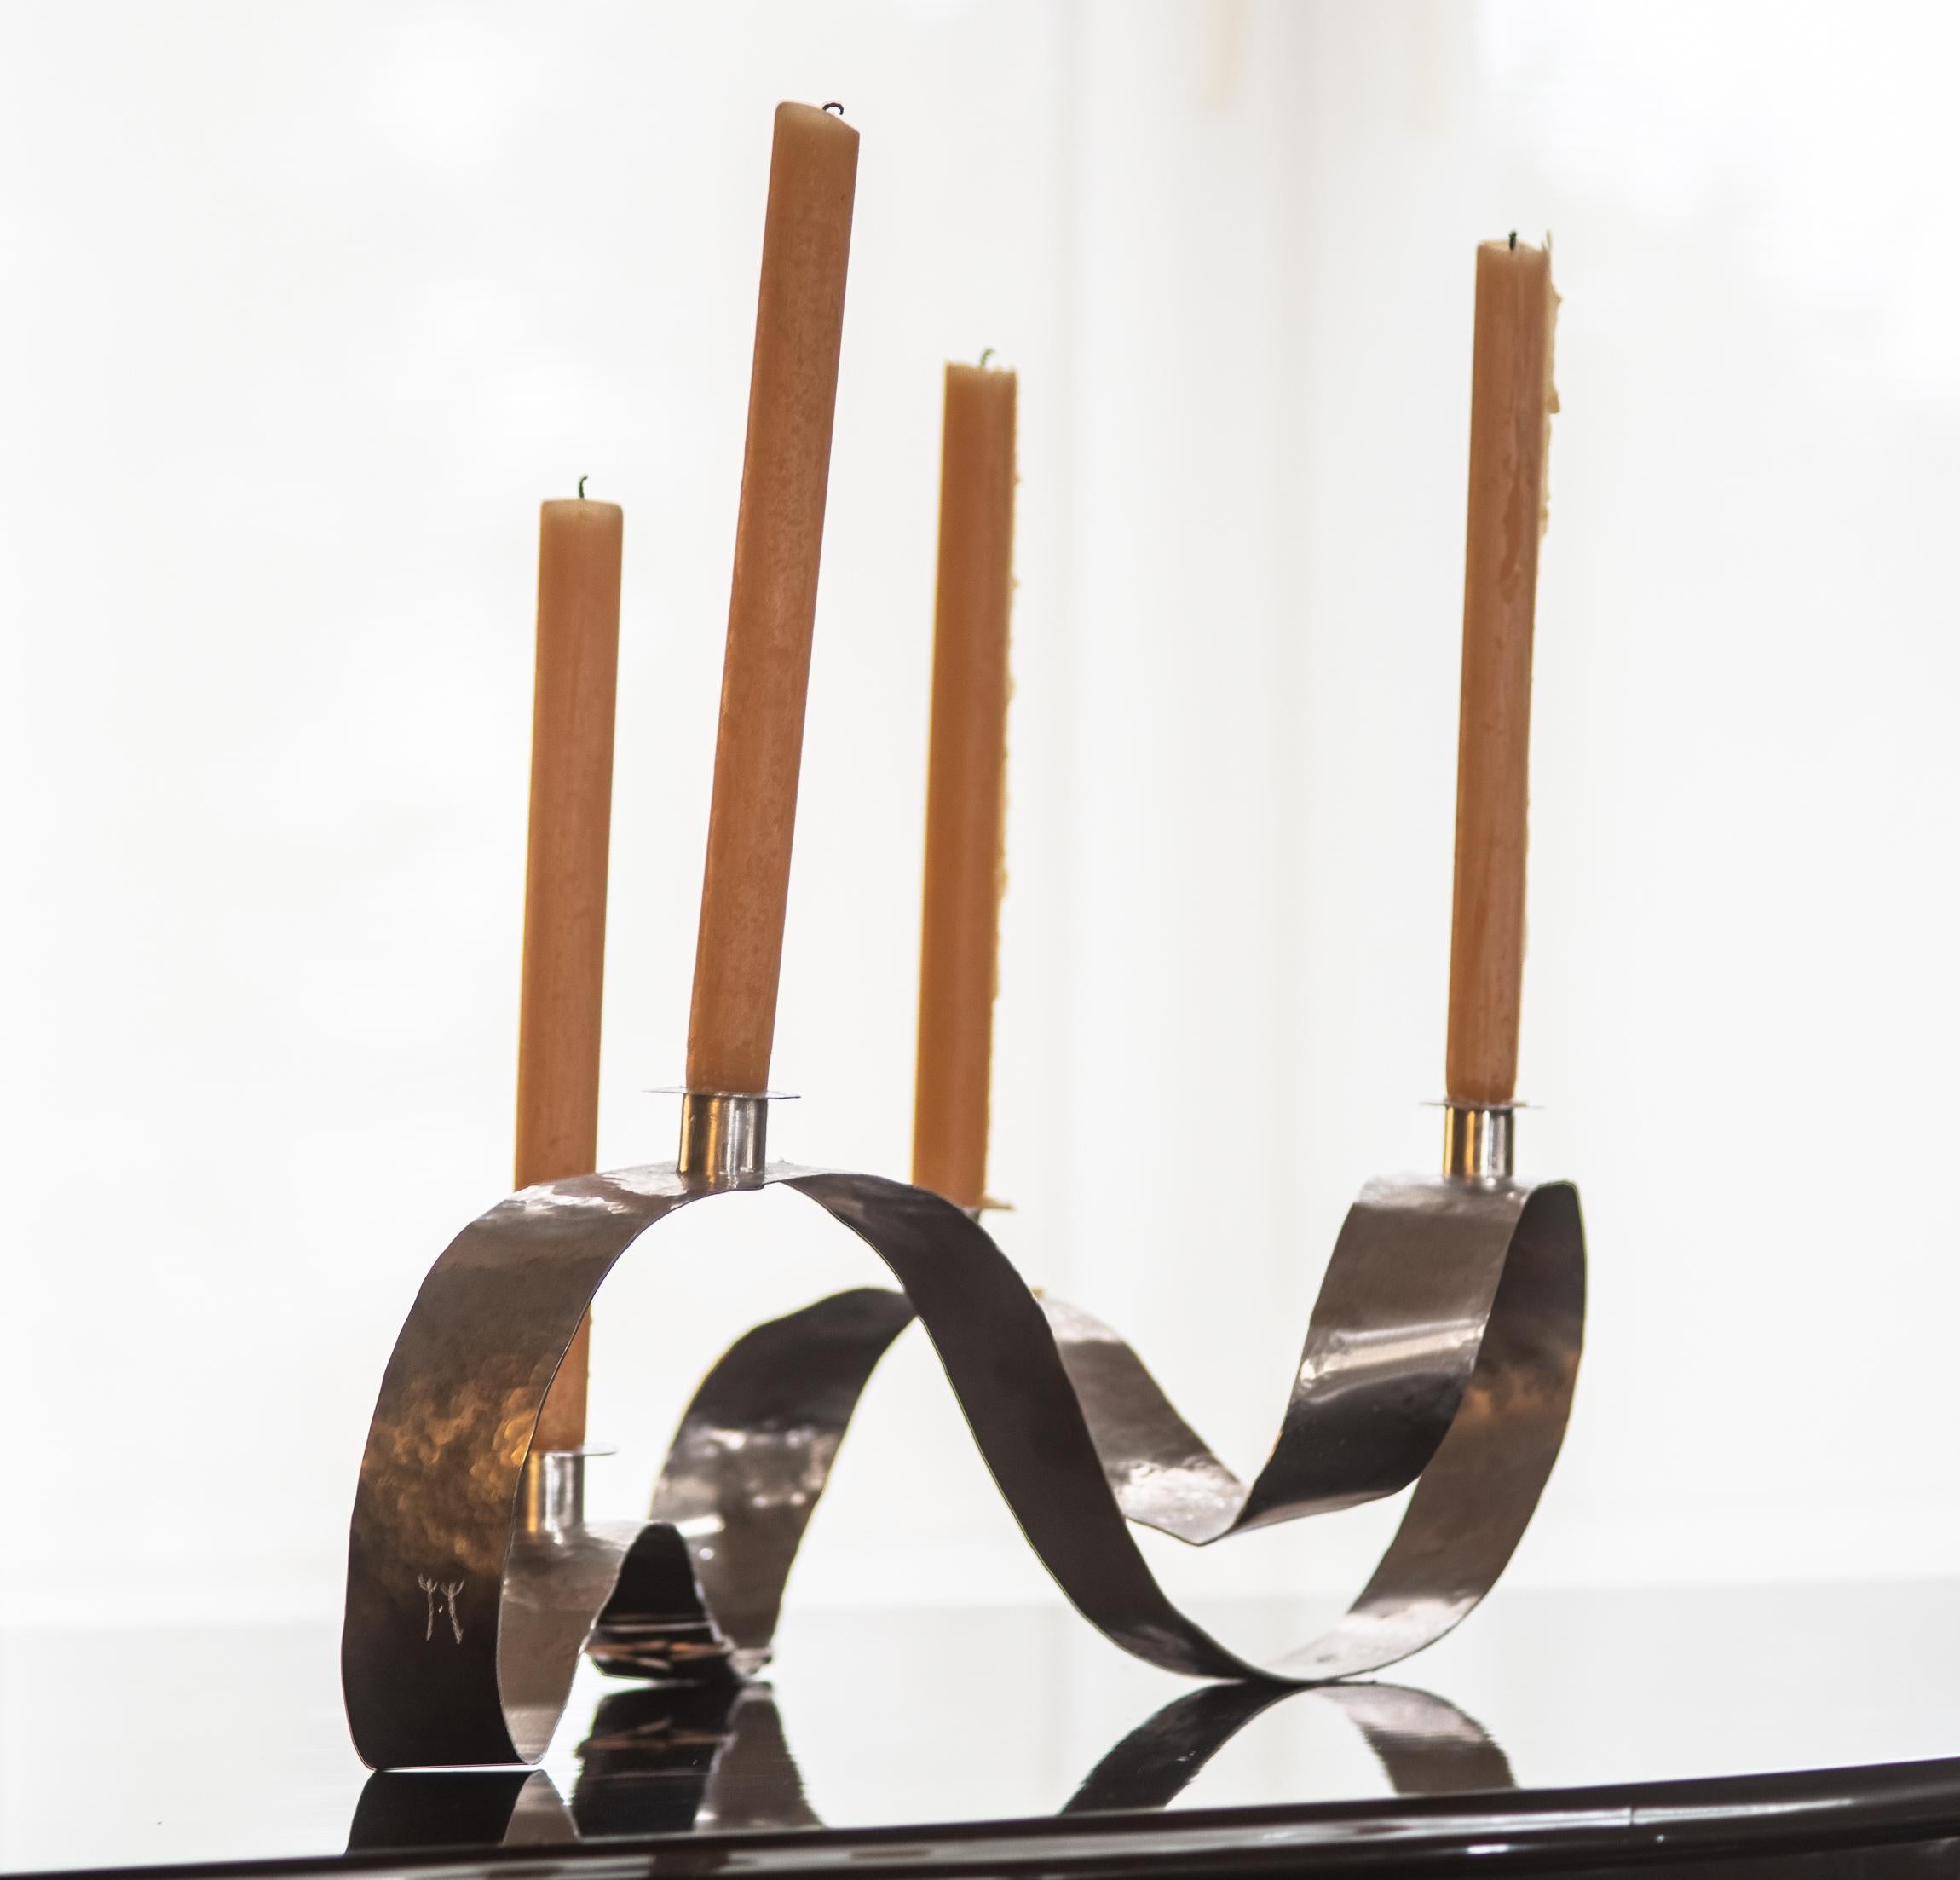 Unique sculpture / candelabra in aluminum hand hammered by Jacques Jarrige.
This tabletop, centerpiece can be commissioned to custom size.